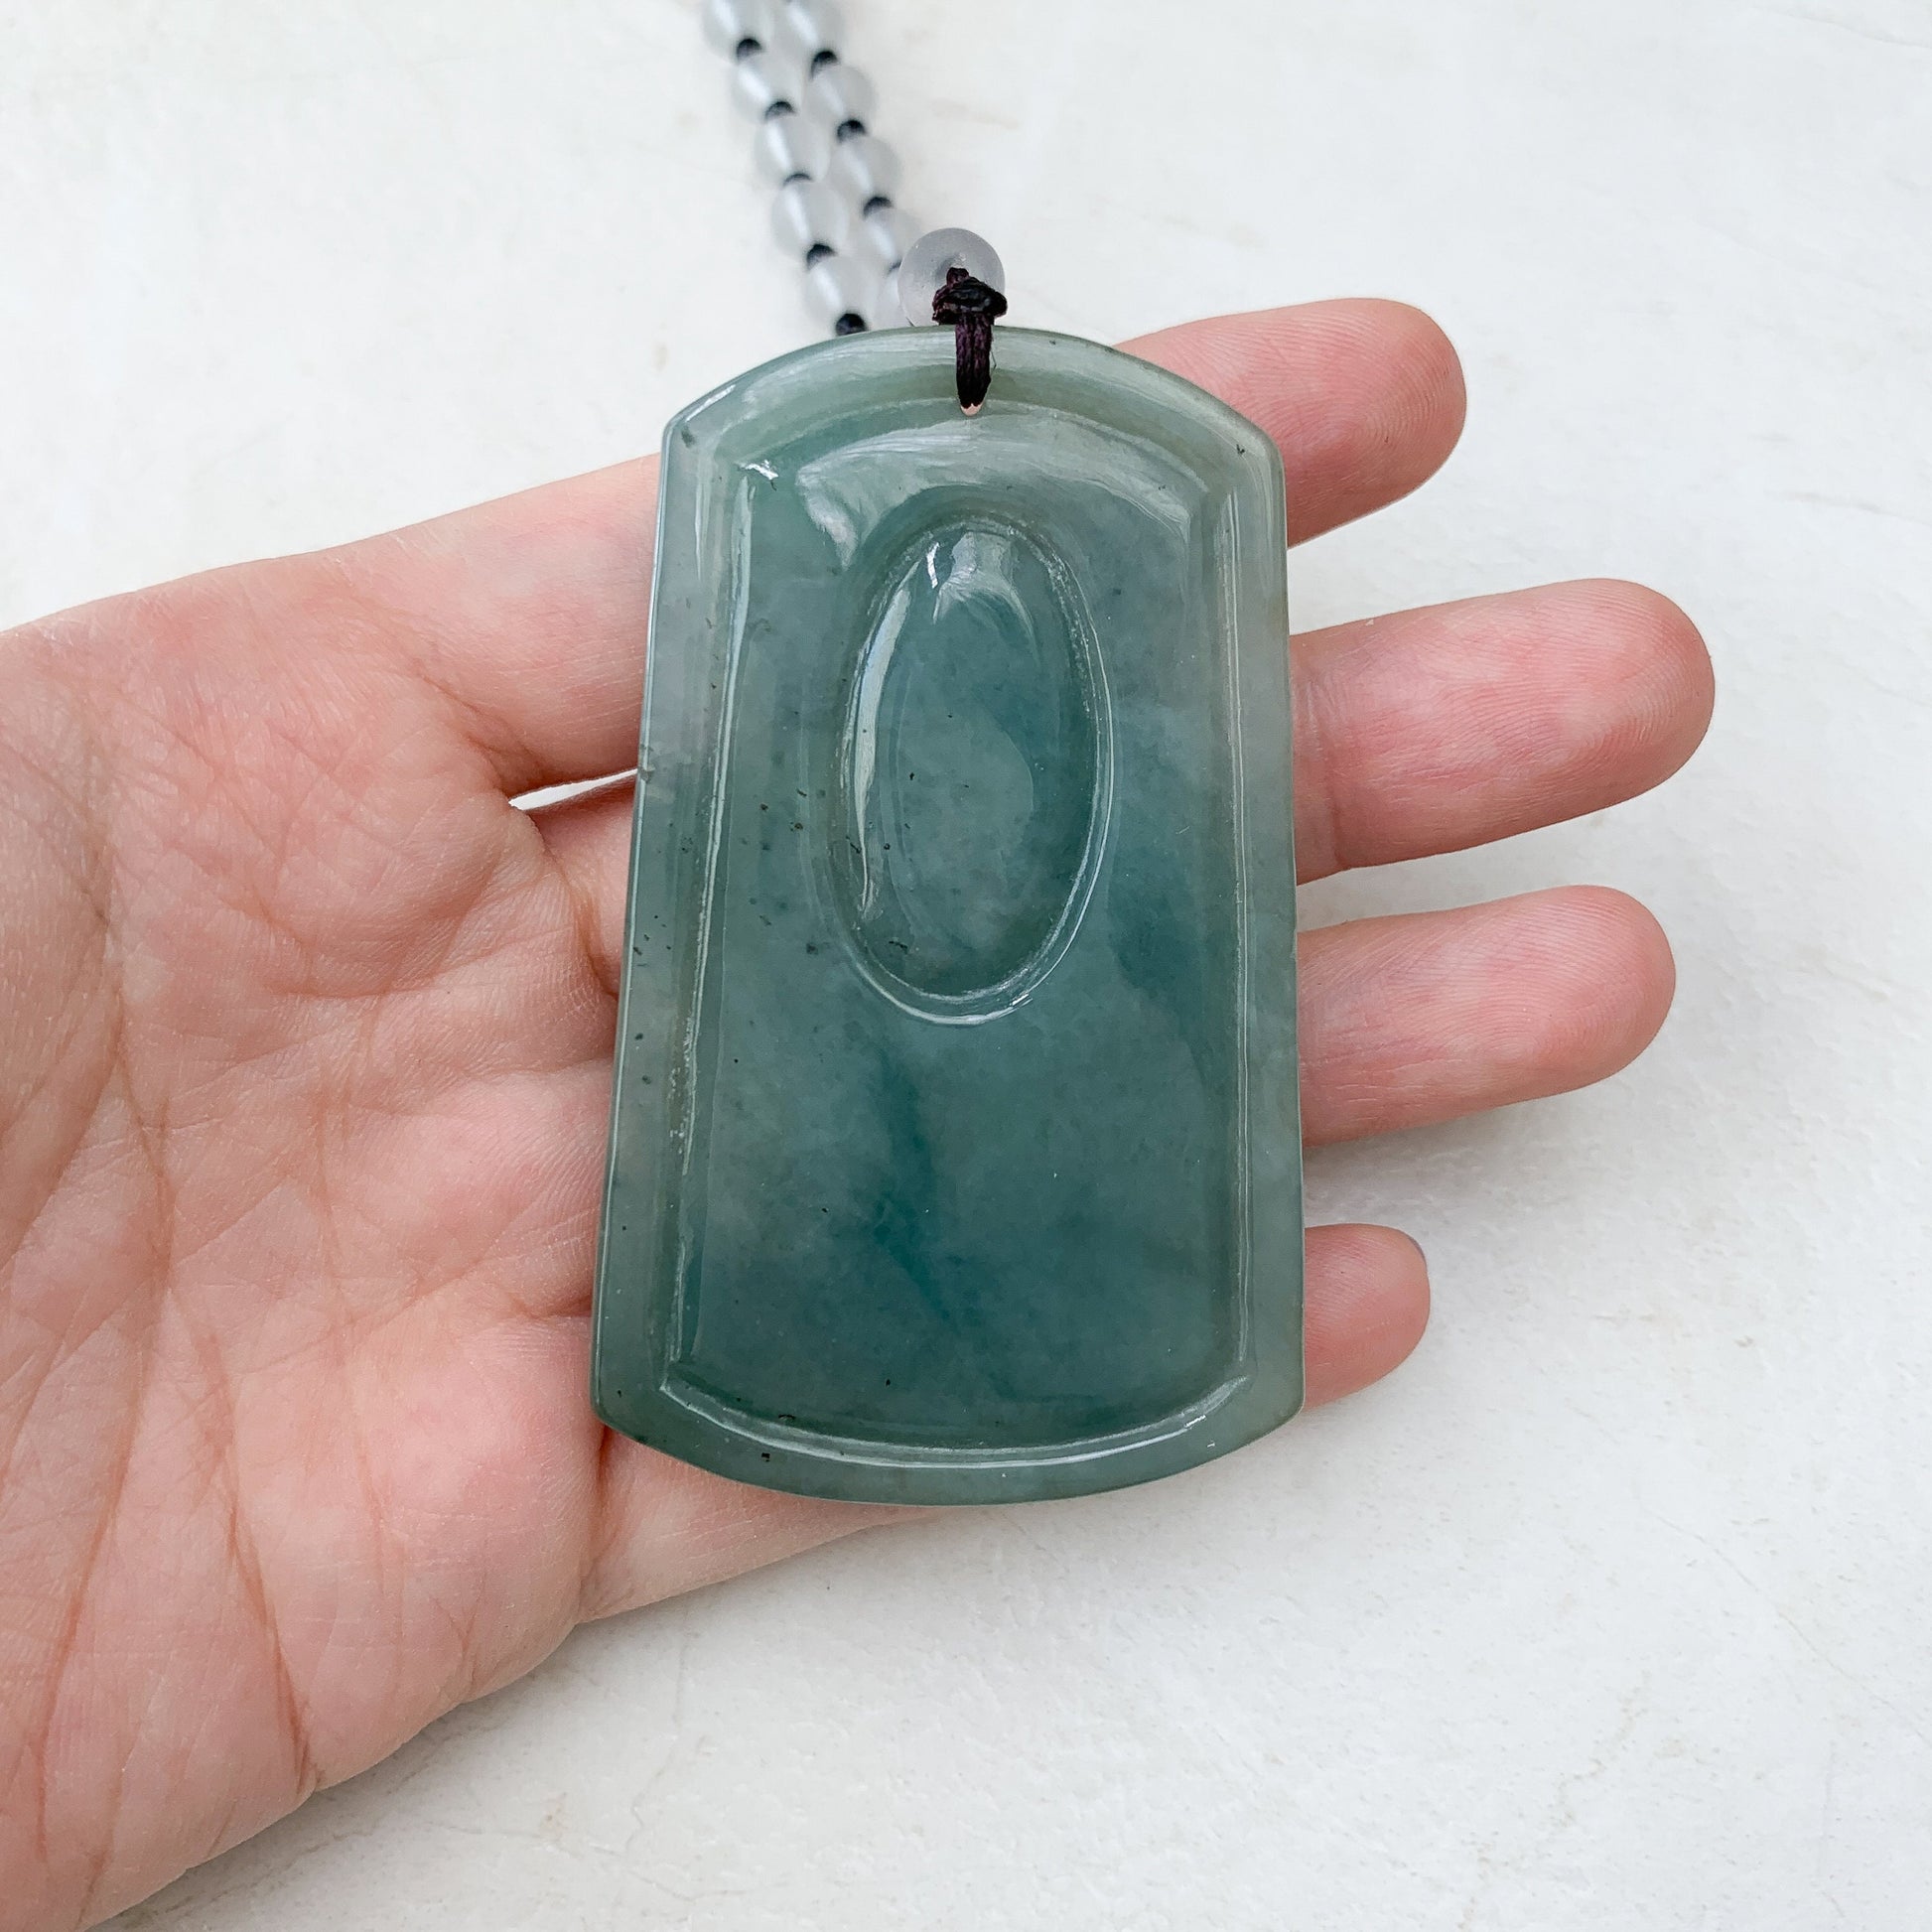 Large Jadeite Jade Dragon Chinese Zodiac Hand Carved Pendant Necklace, YJ-0321-0465253 - AriaDesignCollection